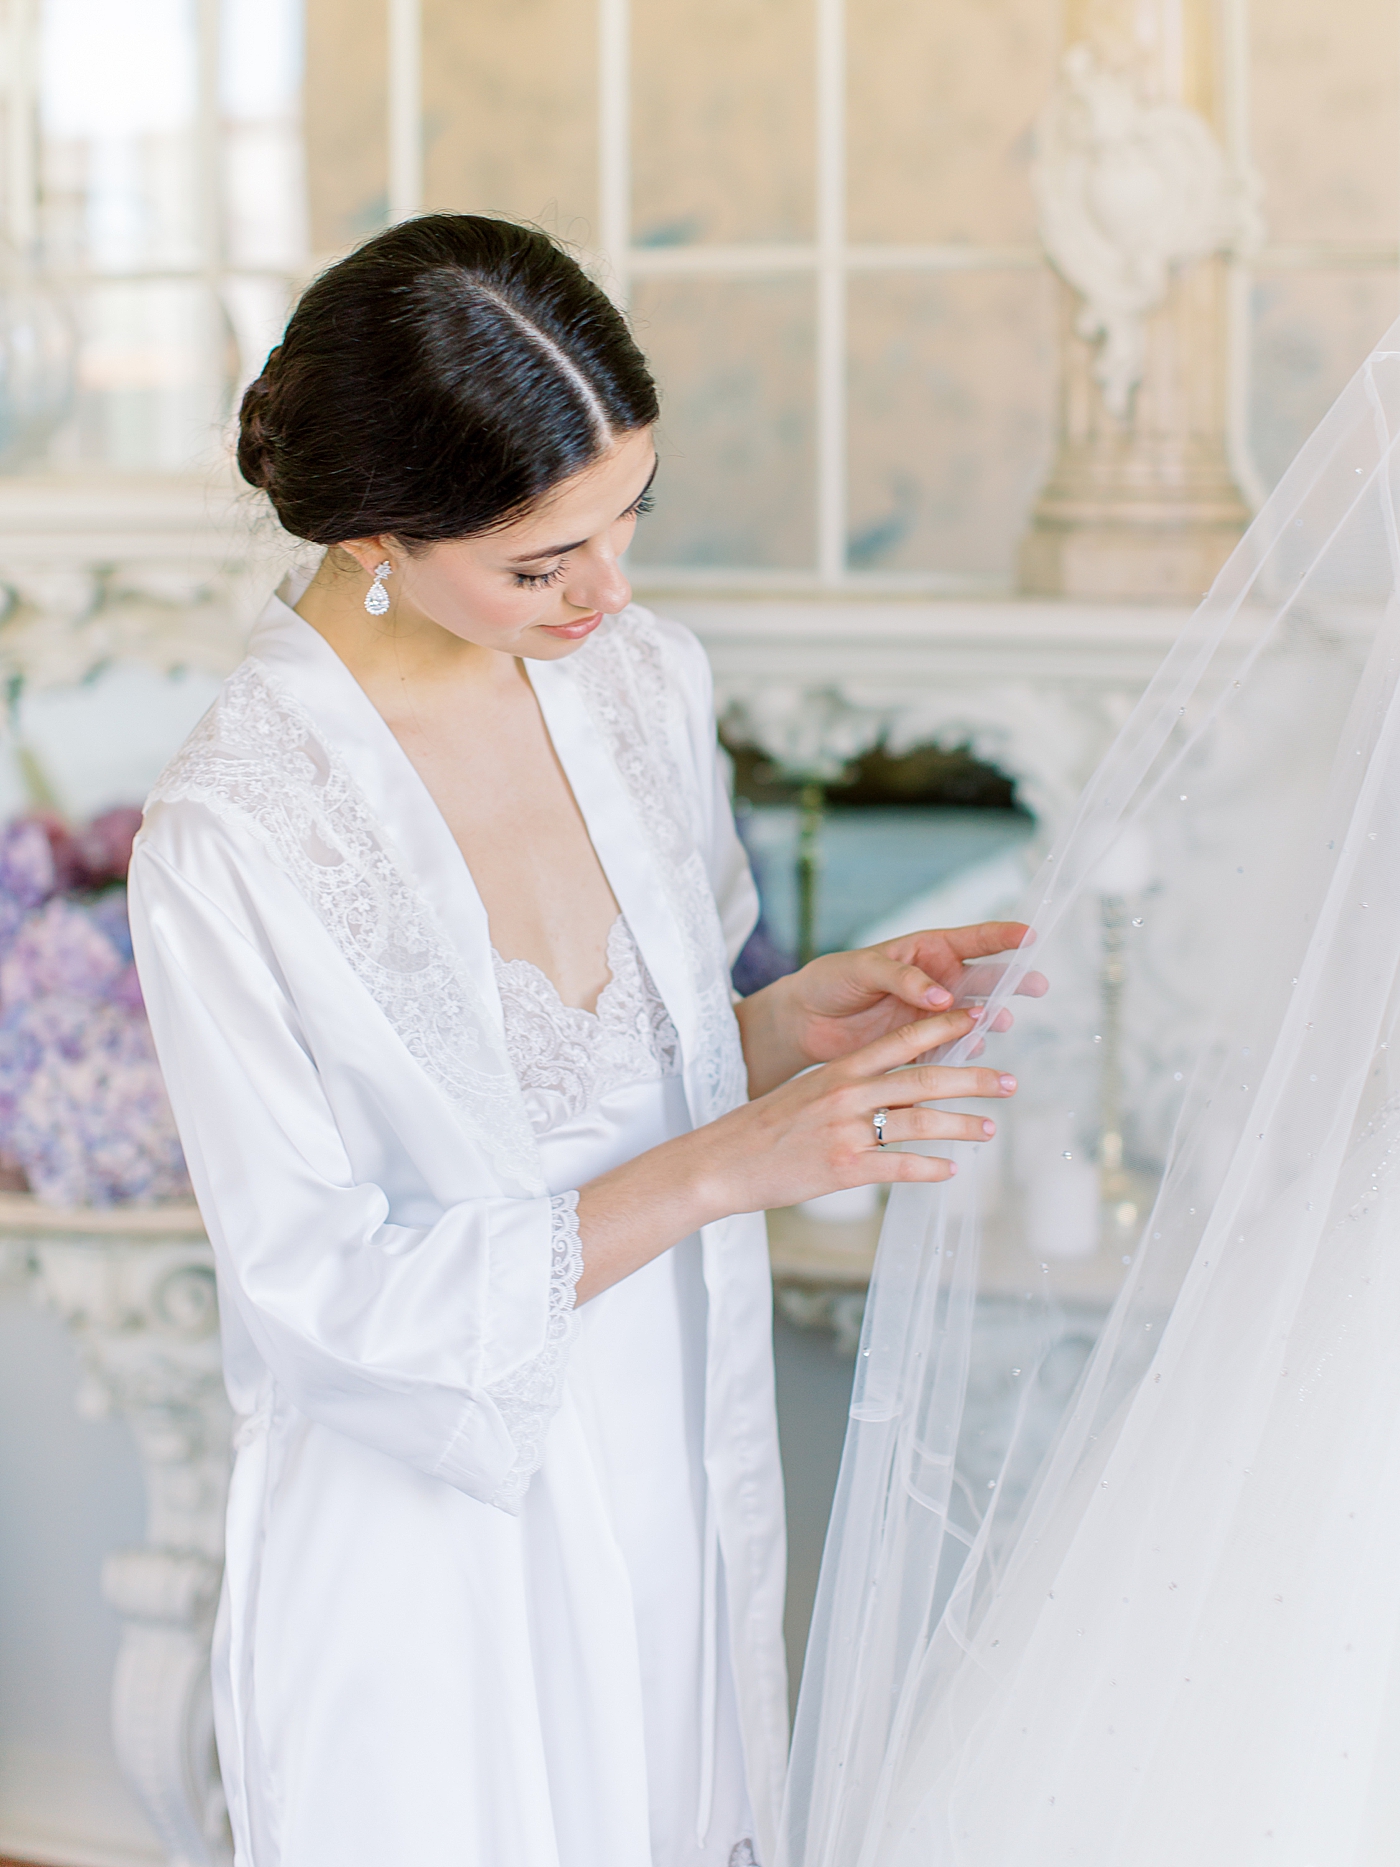 Bride admiring her veil on a mannequin | Image by Diane Sotero 